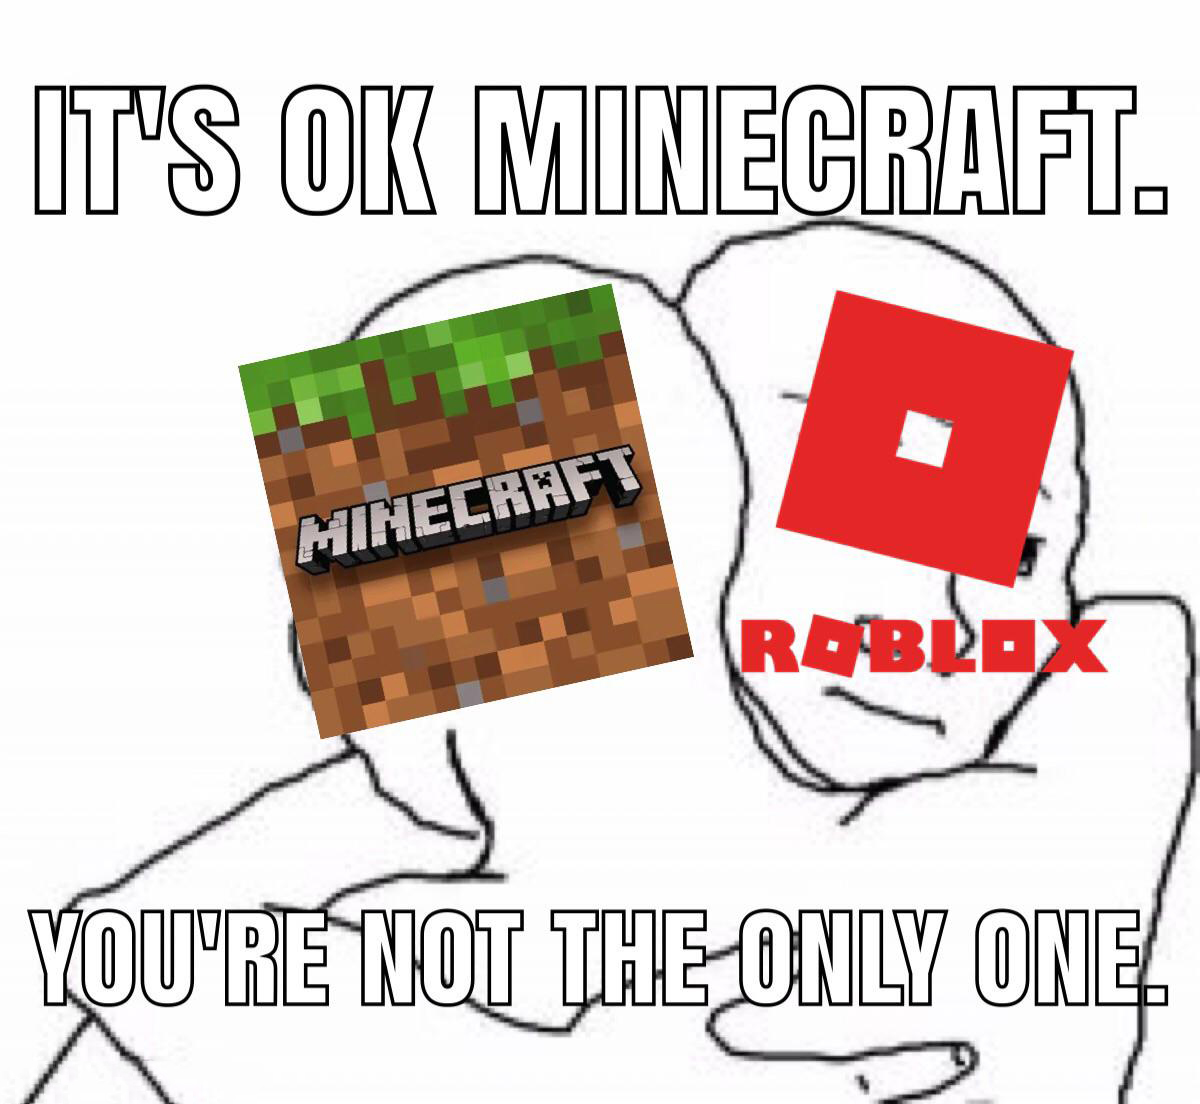 funny memes - dank memes - know that feel bro - It'S Ok Minecraft. D Roblox Minecraft J You'Re Not The Only One!